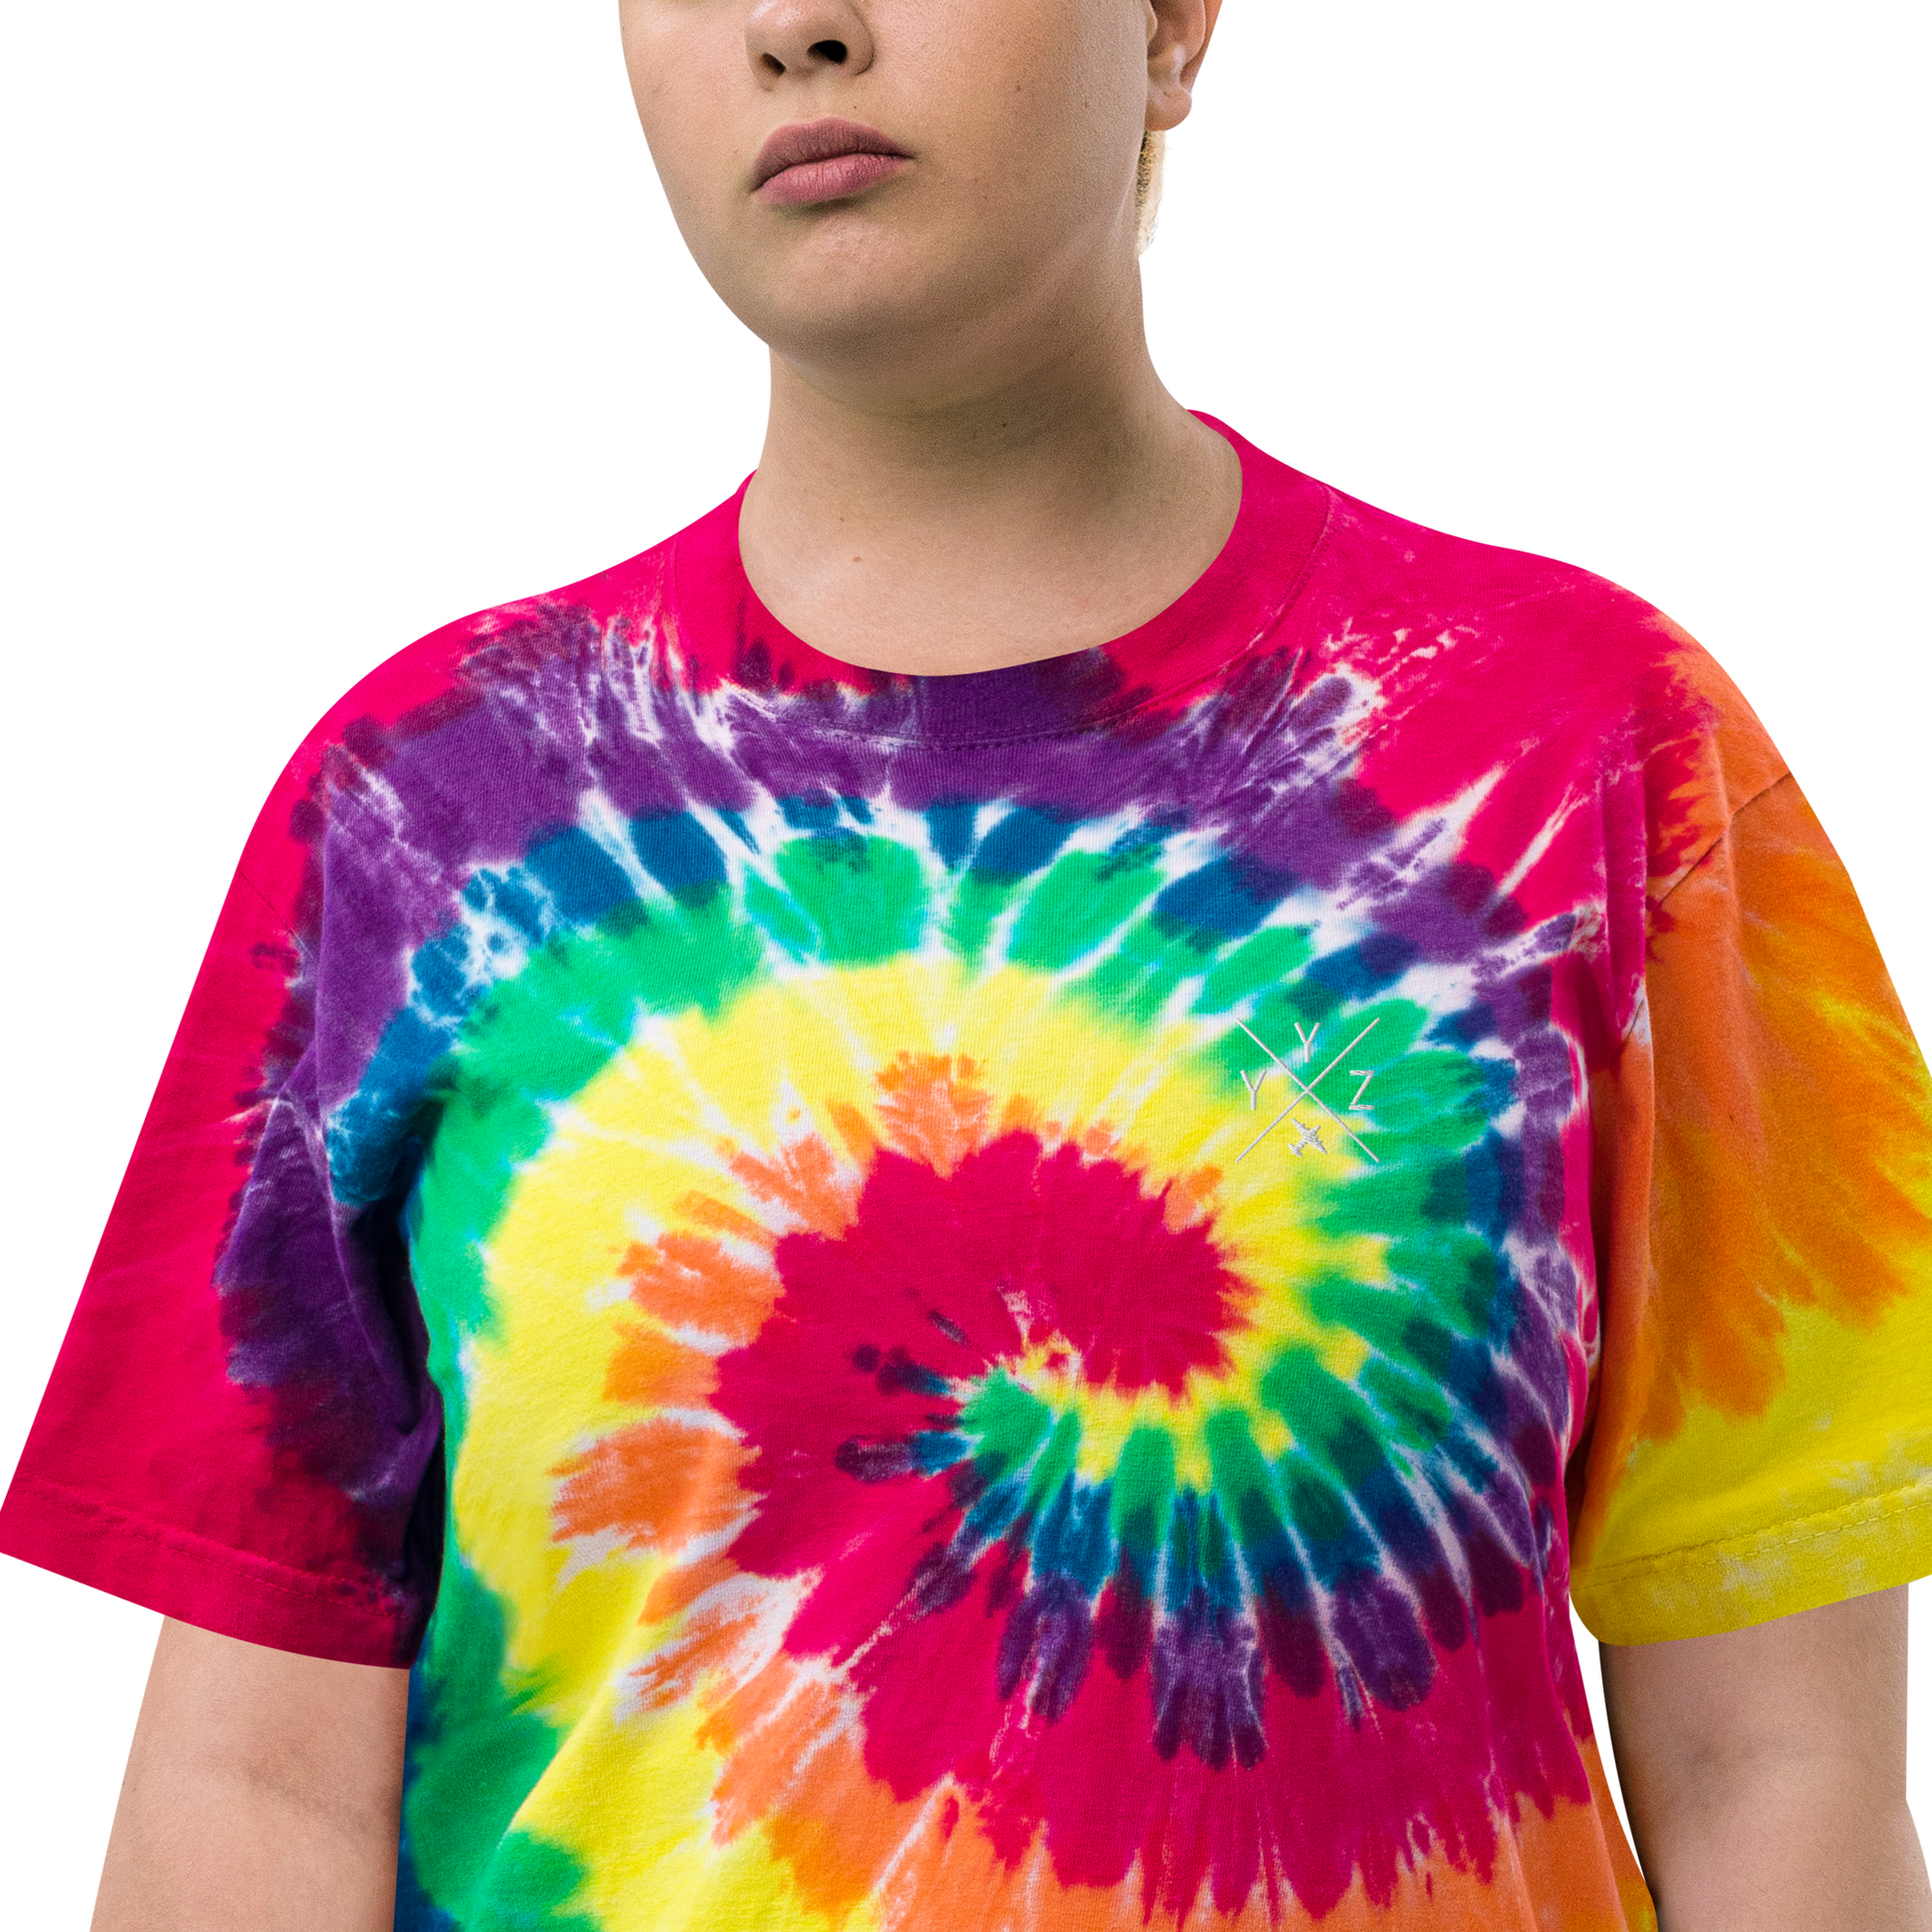 YHM Designs - YYZ Toronto Oversized Tie-Dye T-Shirt - Crossed-X Design with Airport Code and Vintage Propliner - White Embroidery - Image 15